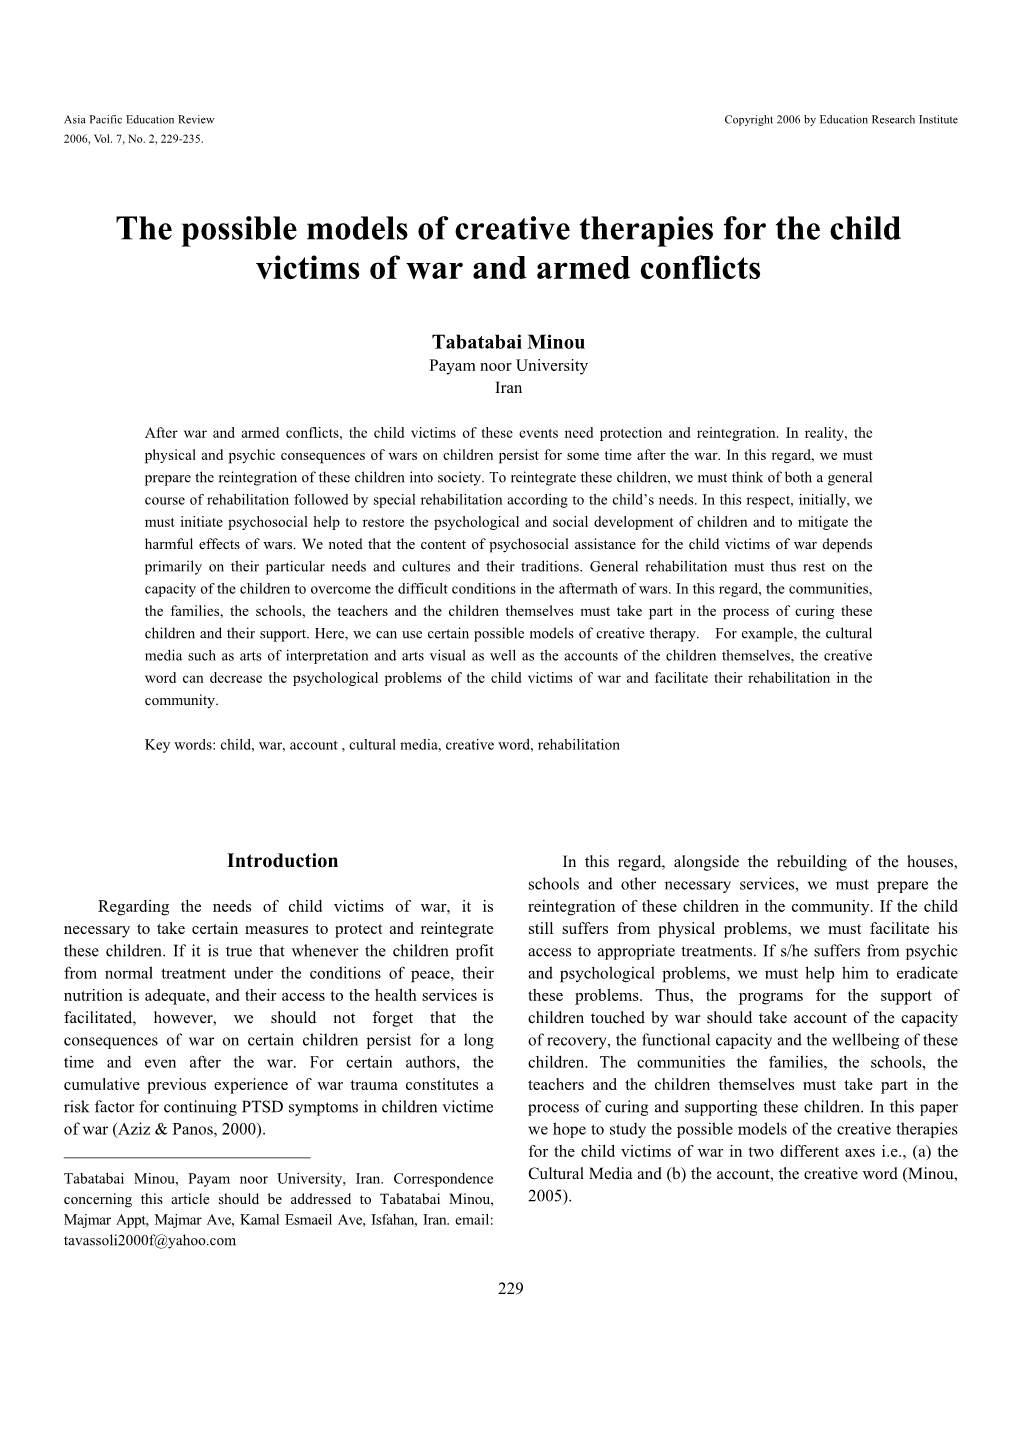 Title: the Possible Models of Creative Therapies for the Child Victims of War